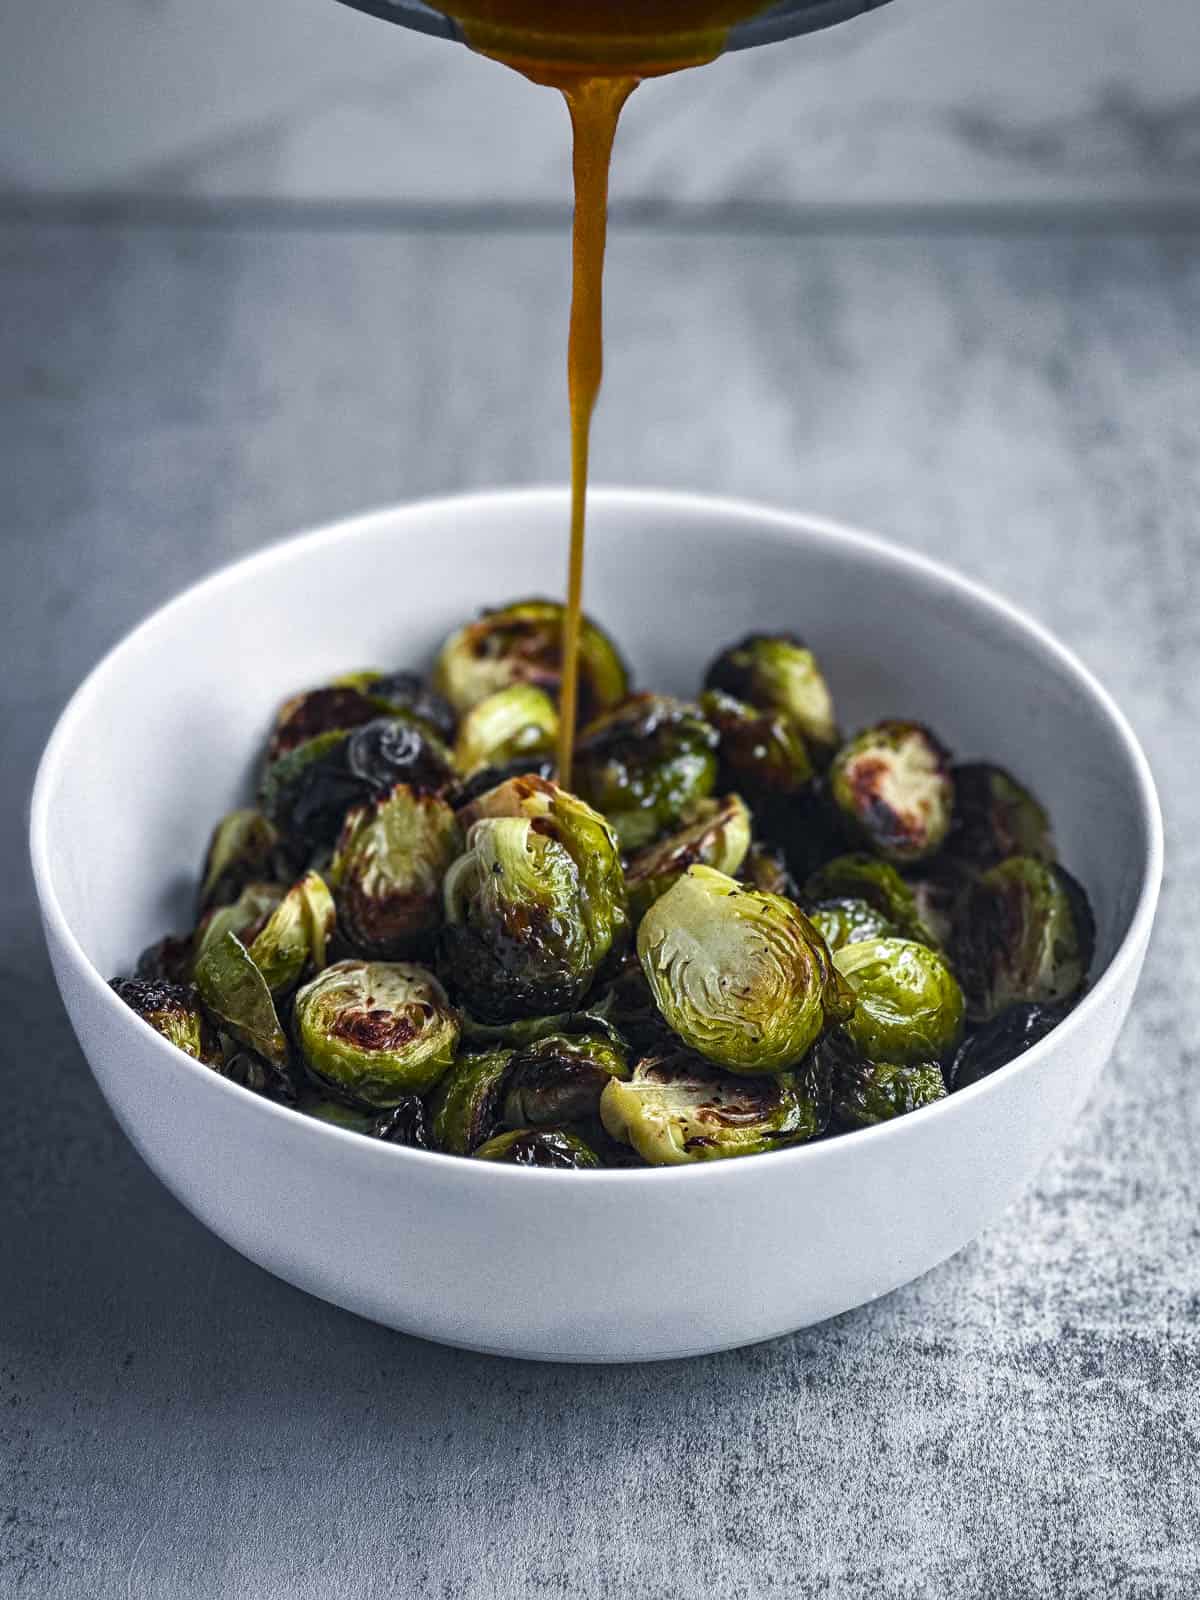 A bowl of roasted brussels sprouts with maple sriracha glaze being drizzled on top.